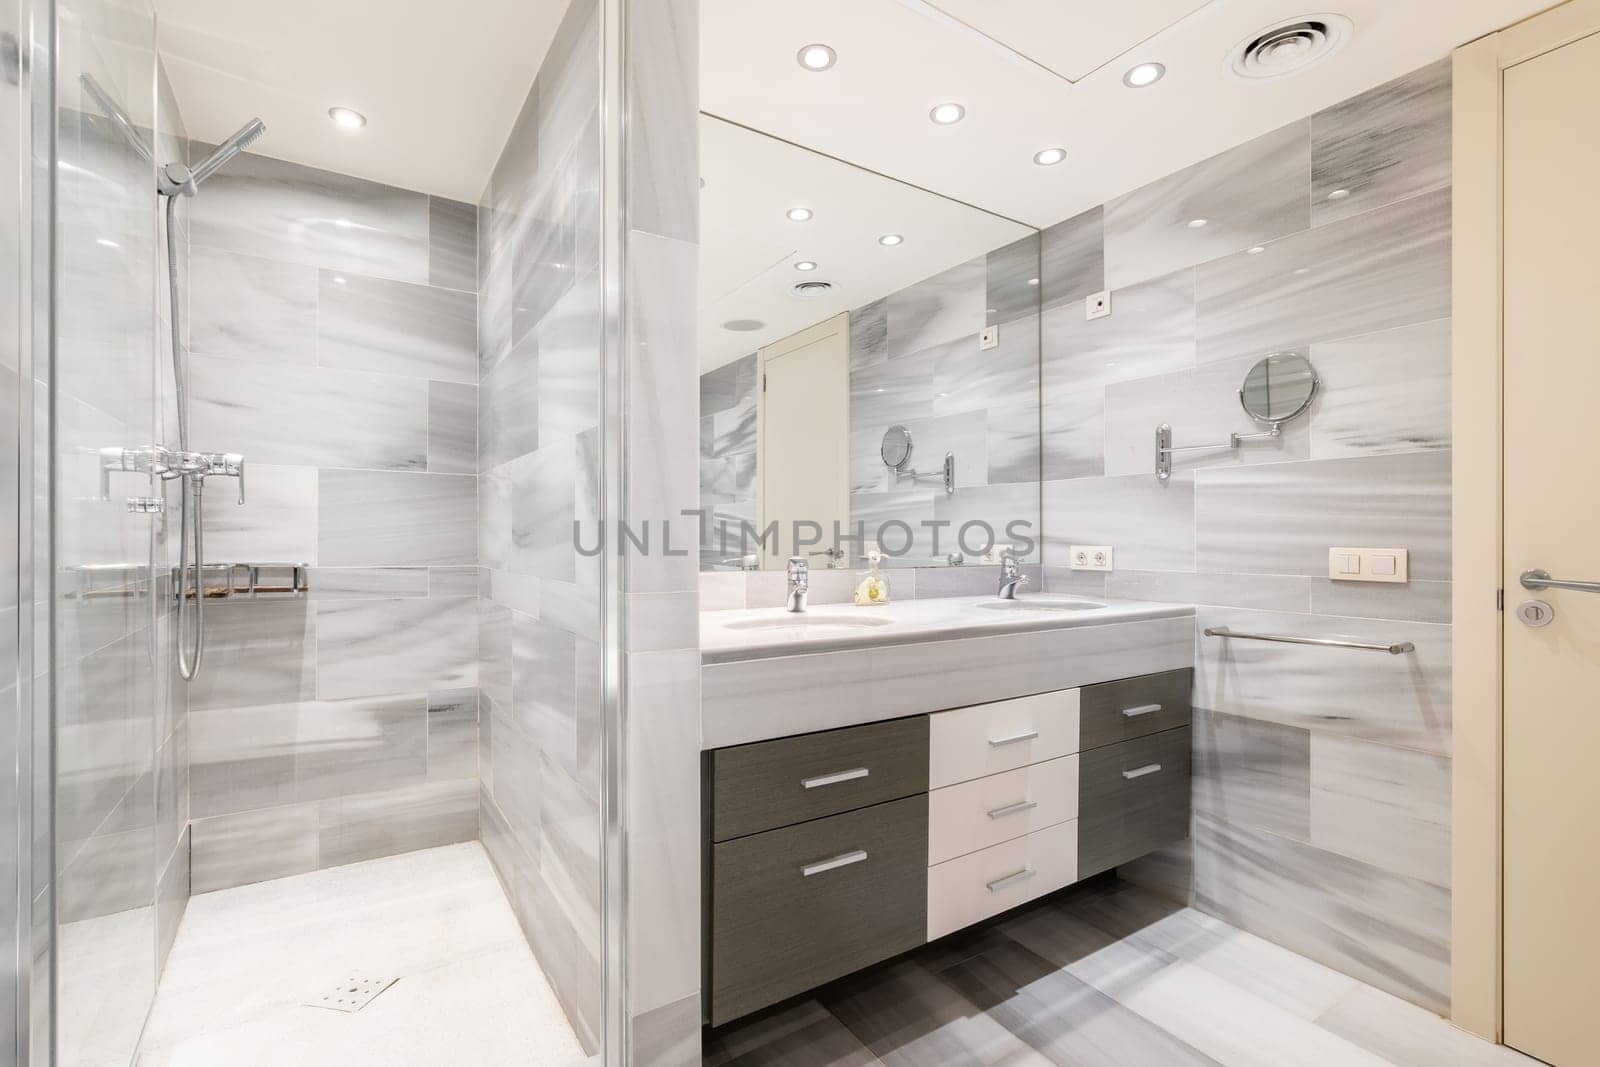 Bathroom with wall separating washbasin with vanity unit from shower by apavlin